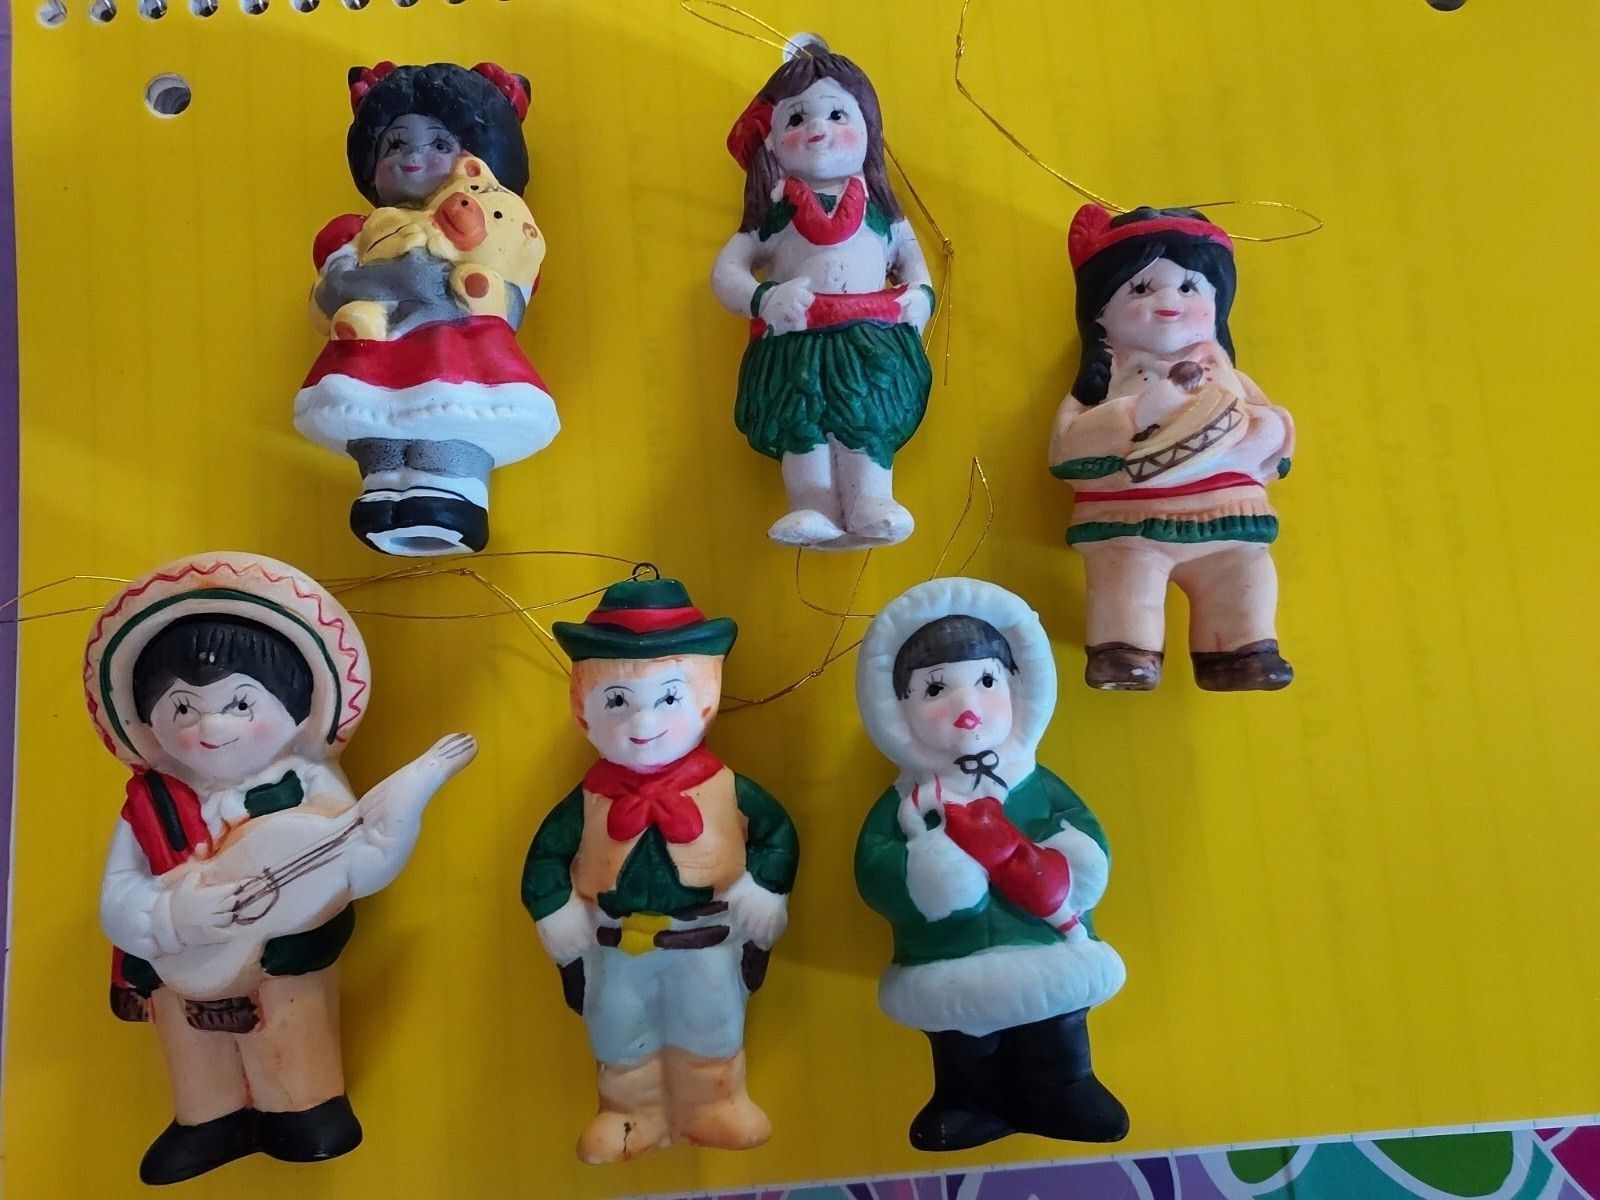 1986 All American Kids Christmas Ornaments Set of 6 